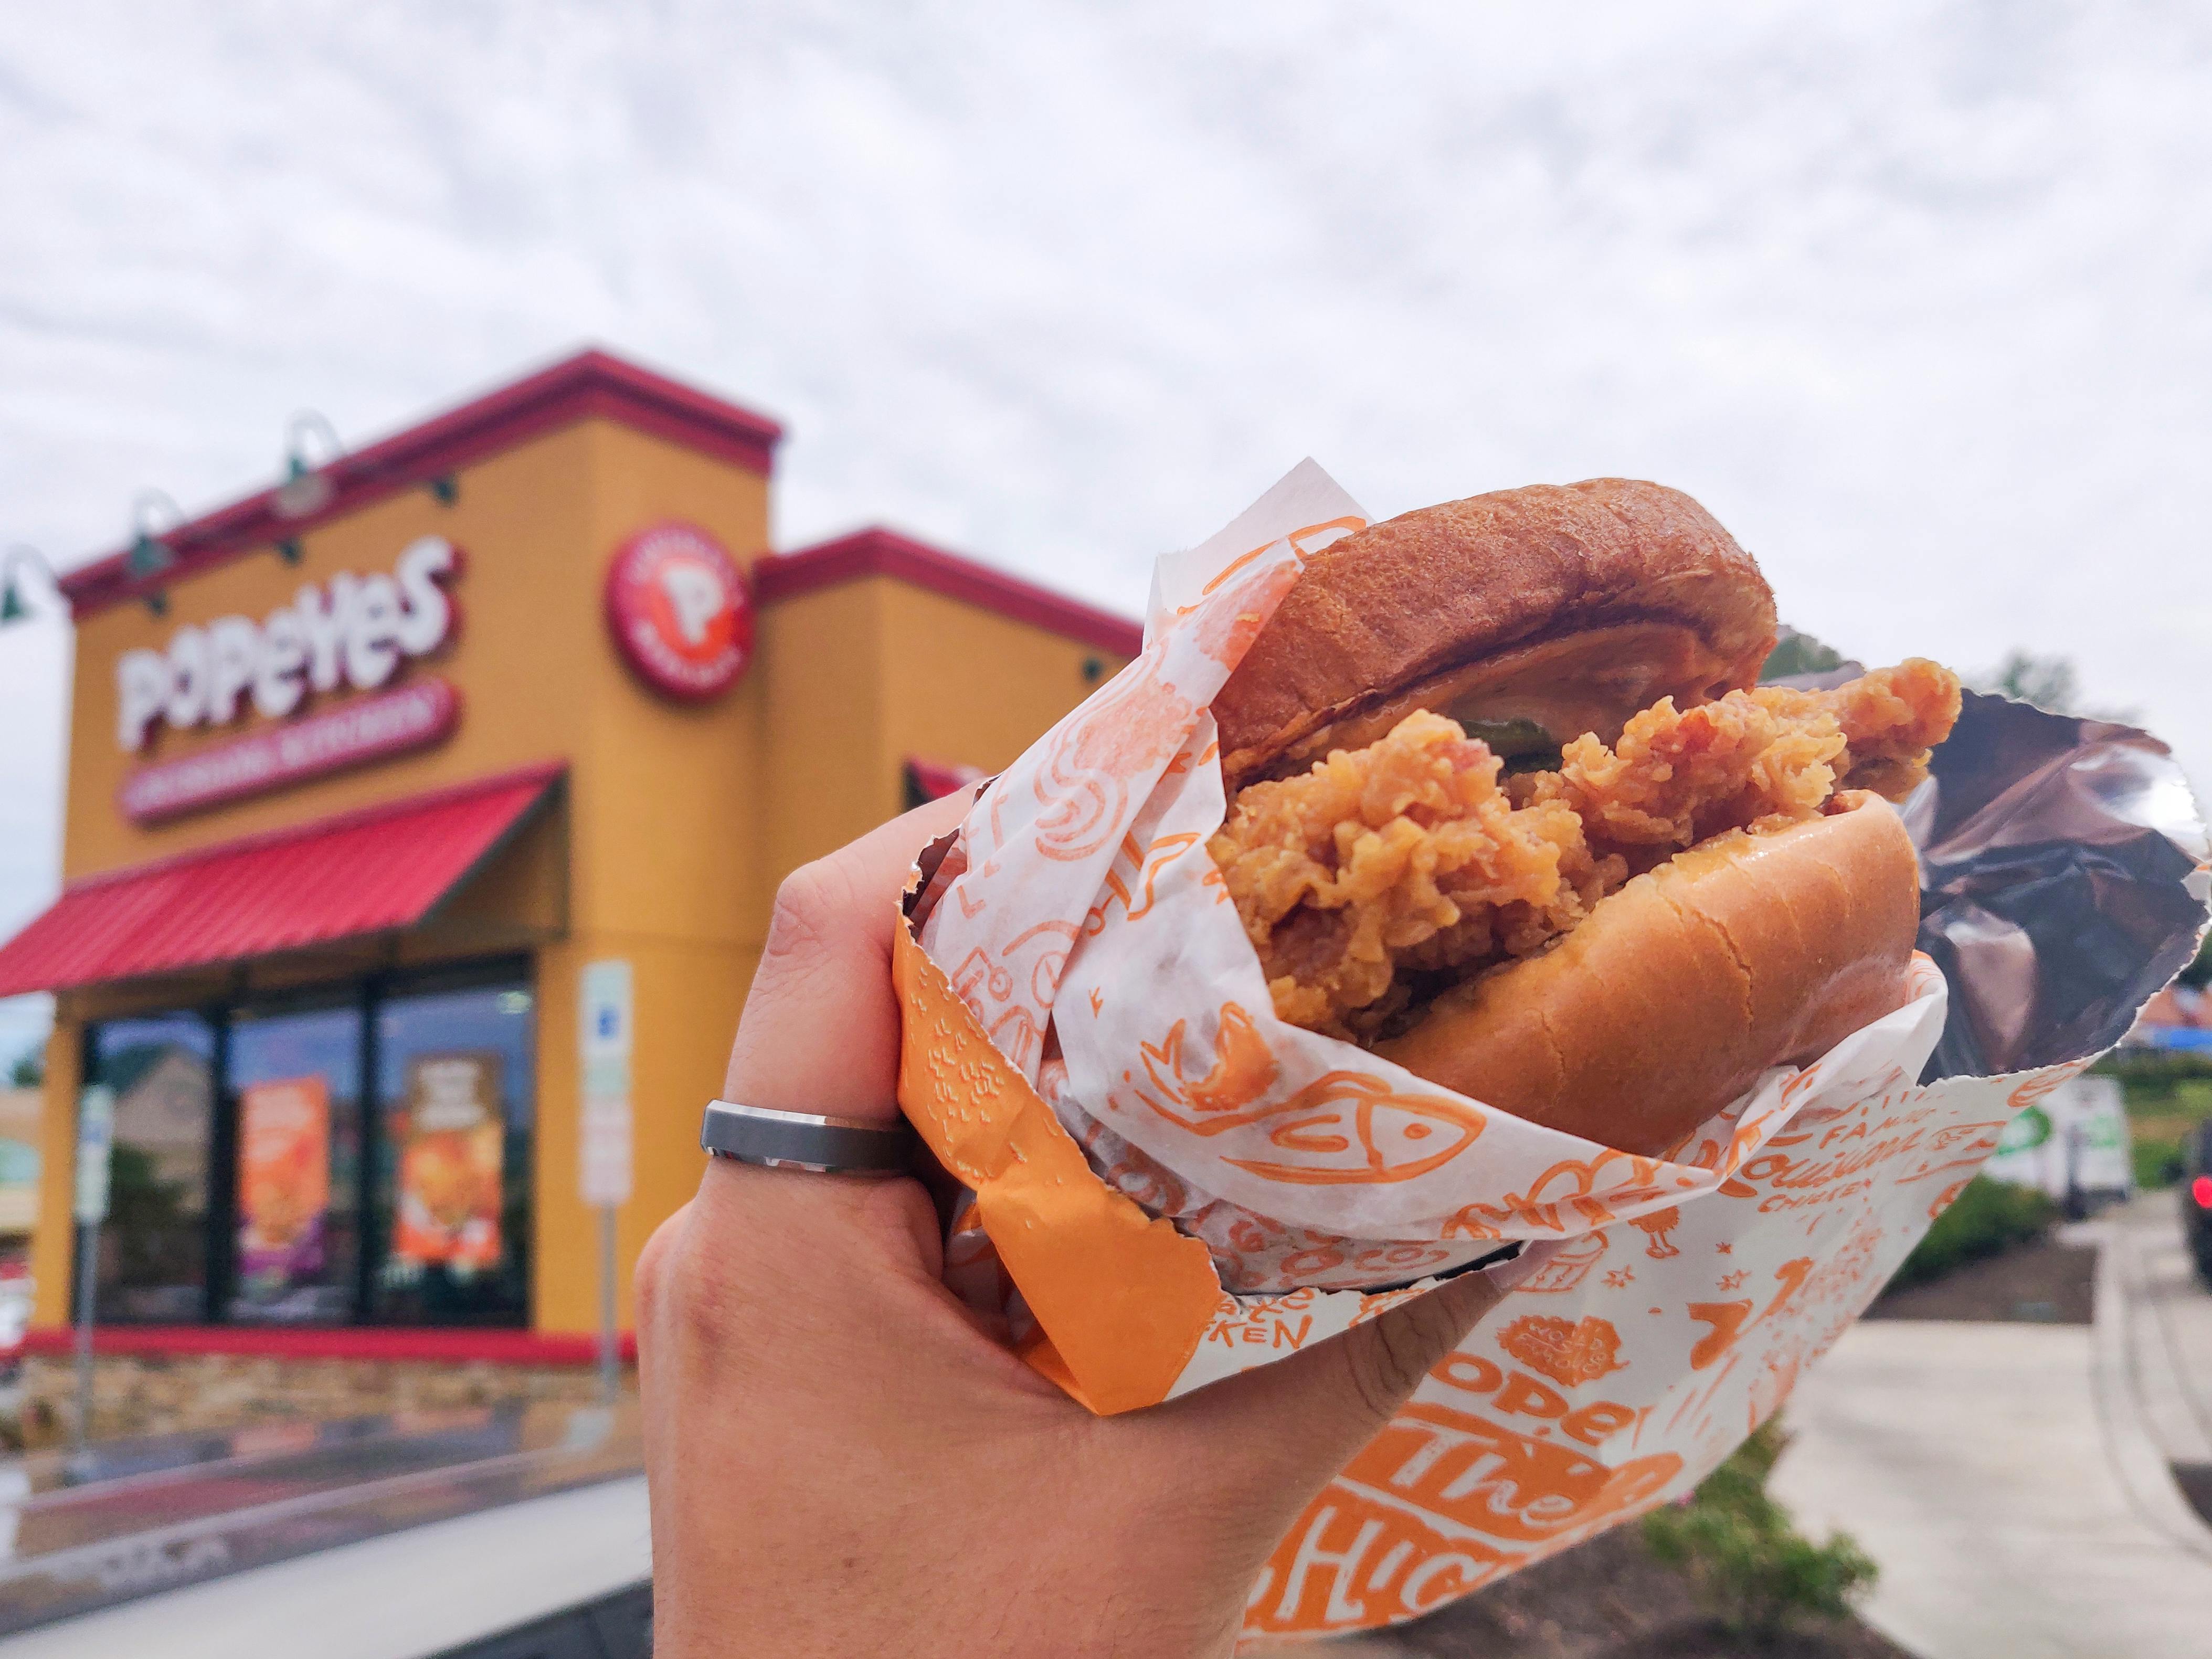 A person's hand holding a Popeyes chicken sandwich with a Popeyes restaurant in the background on National Sandwich Day.